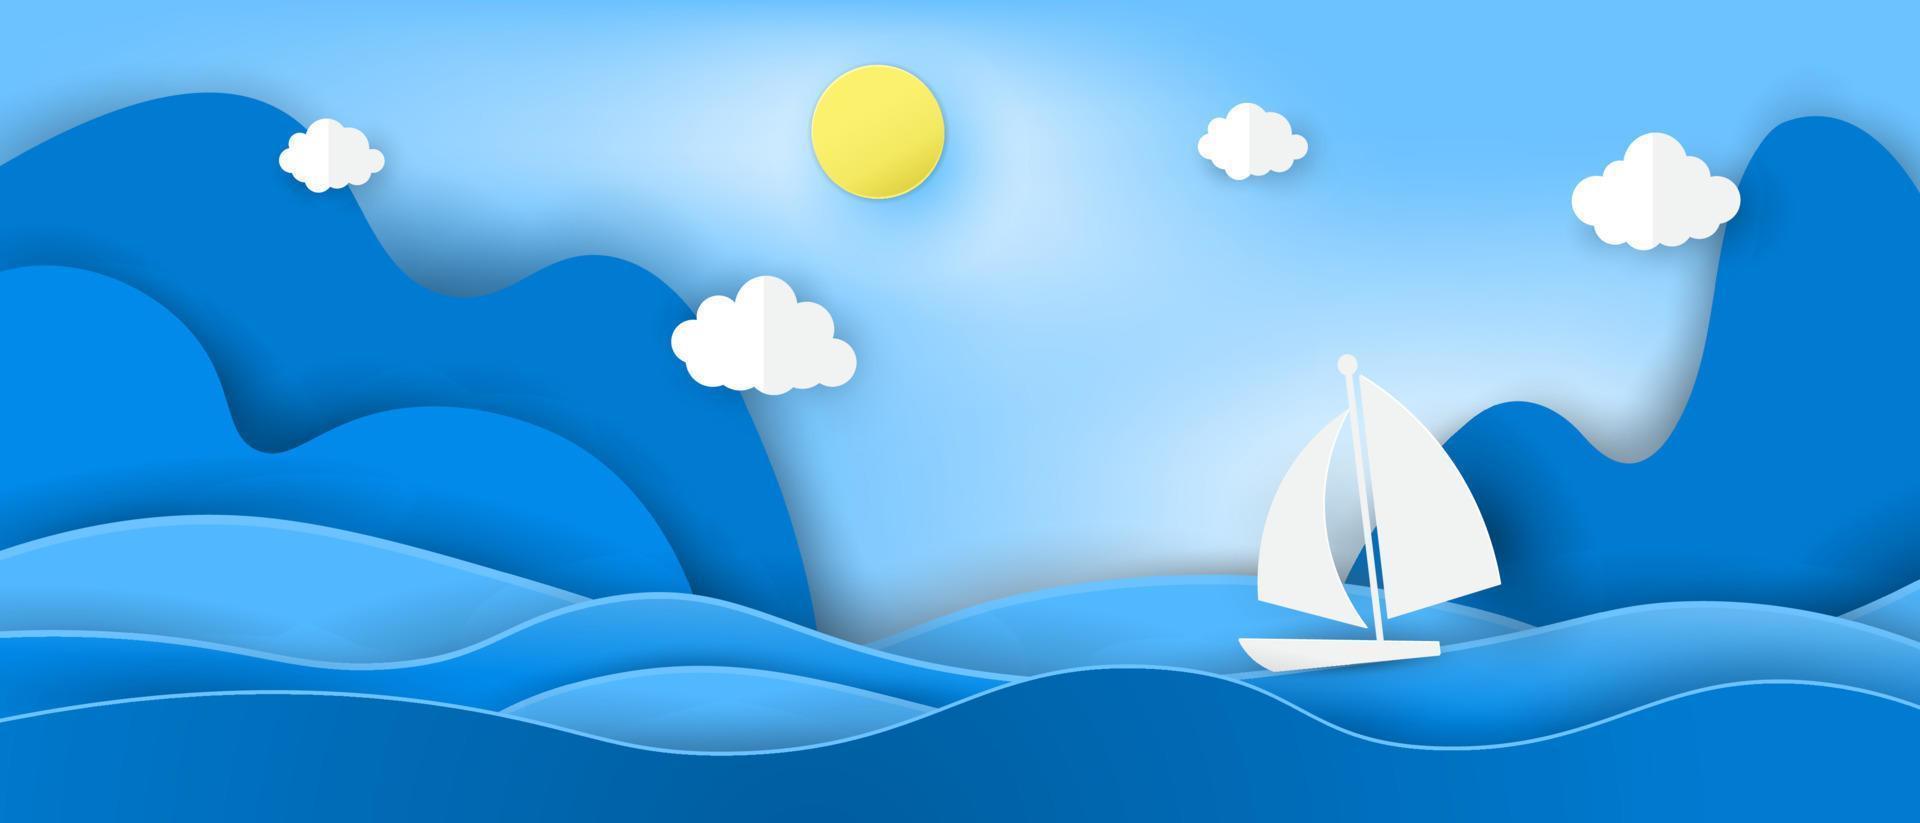 origami boat floating in the blue sea. vector